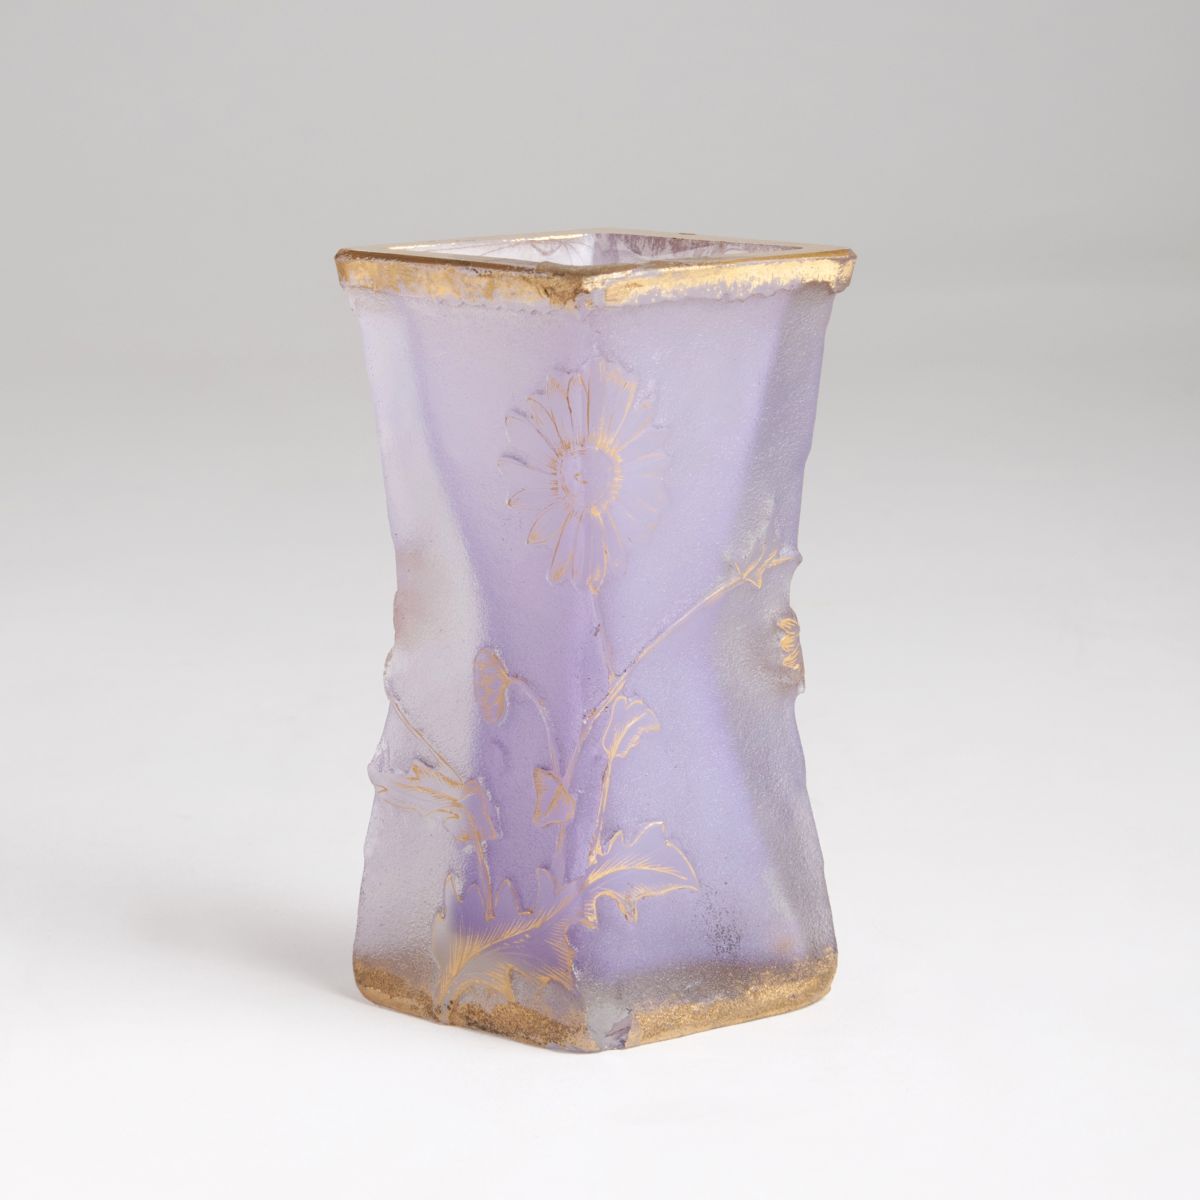 A small diamond-shaped Vase with Thistles